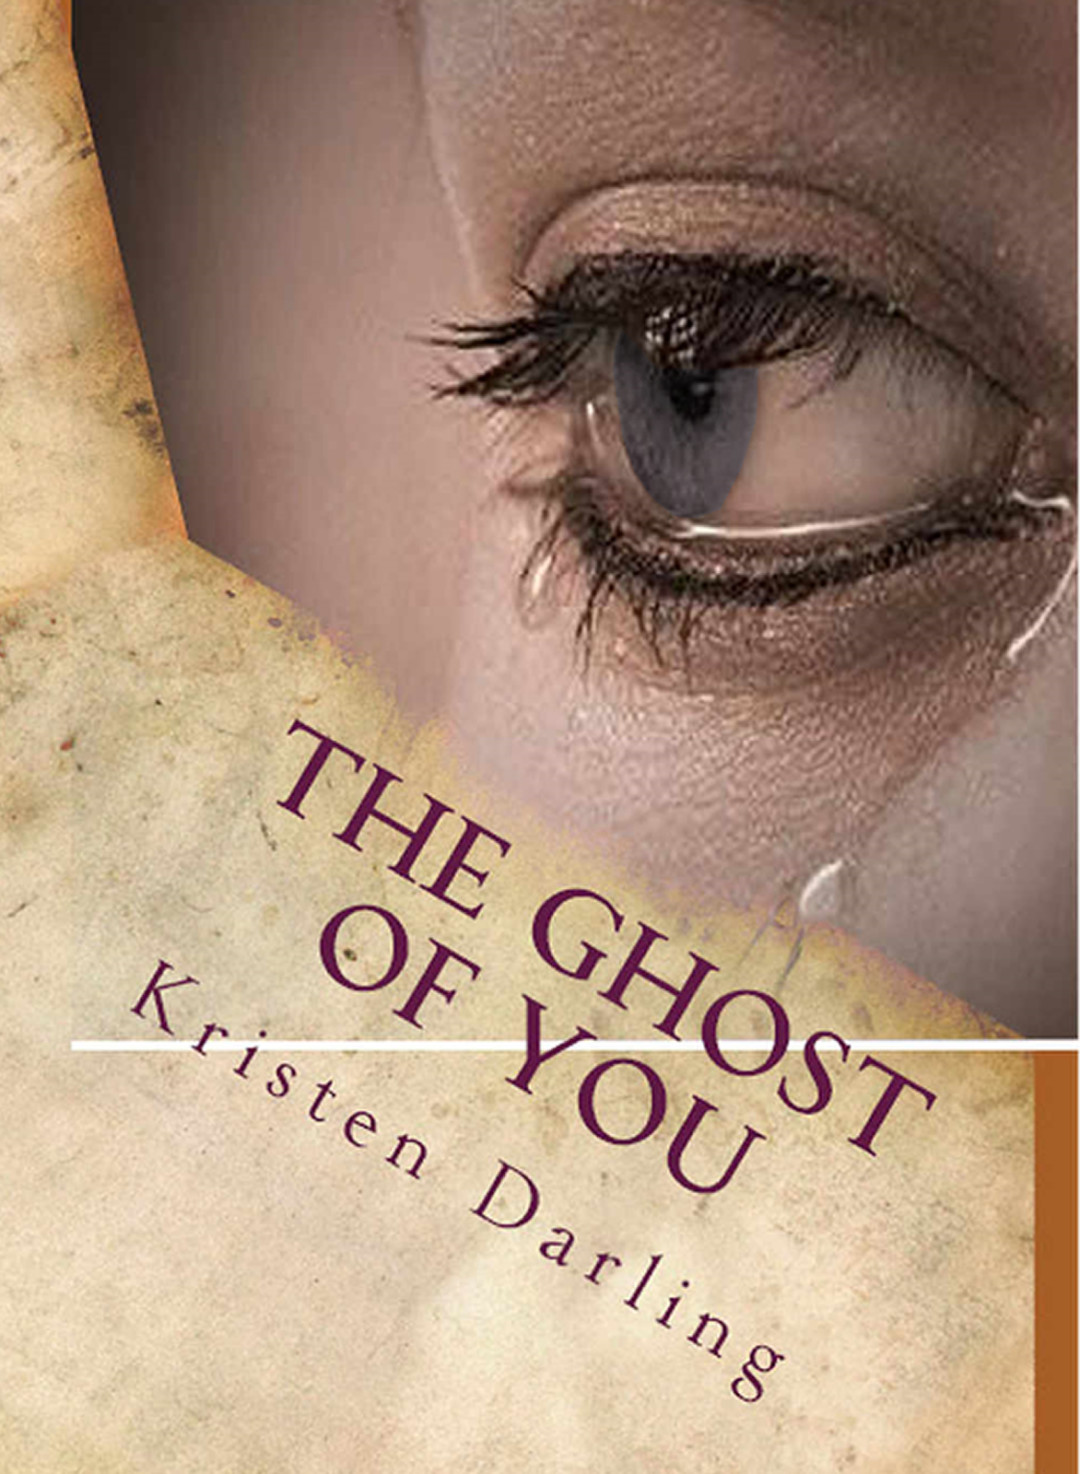 falling for the ghost of you by nicole christie